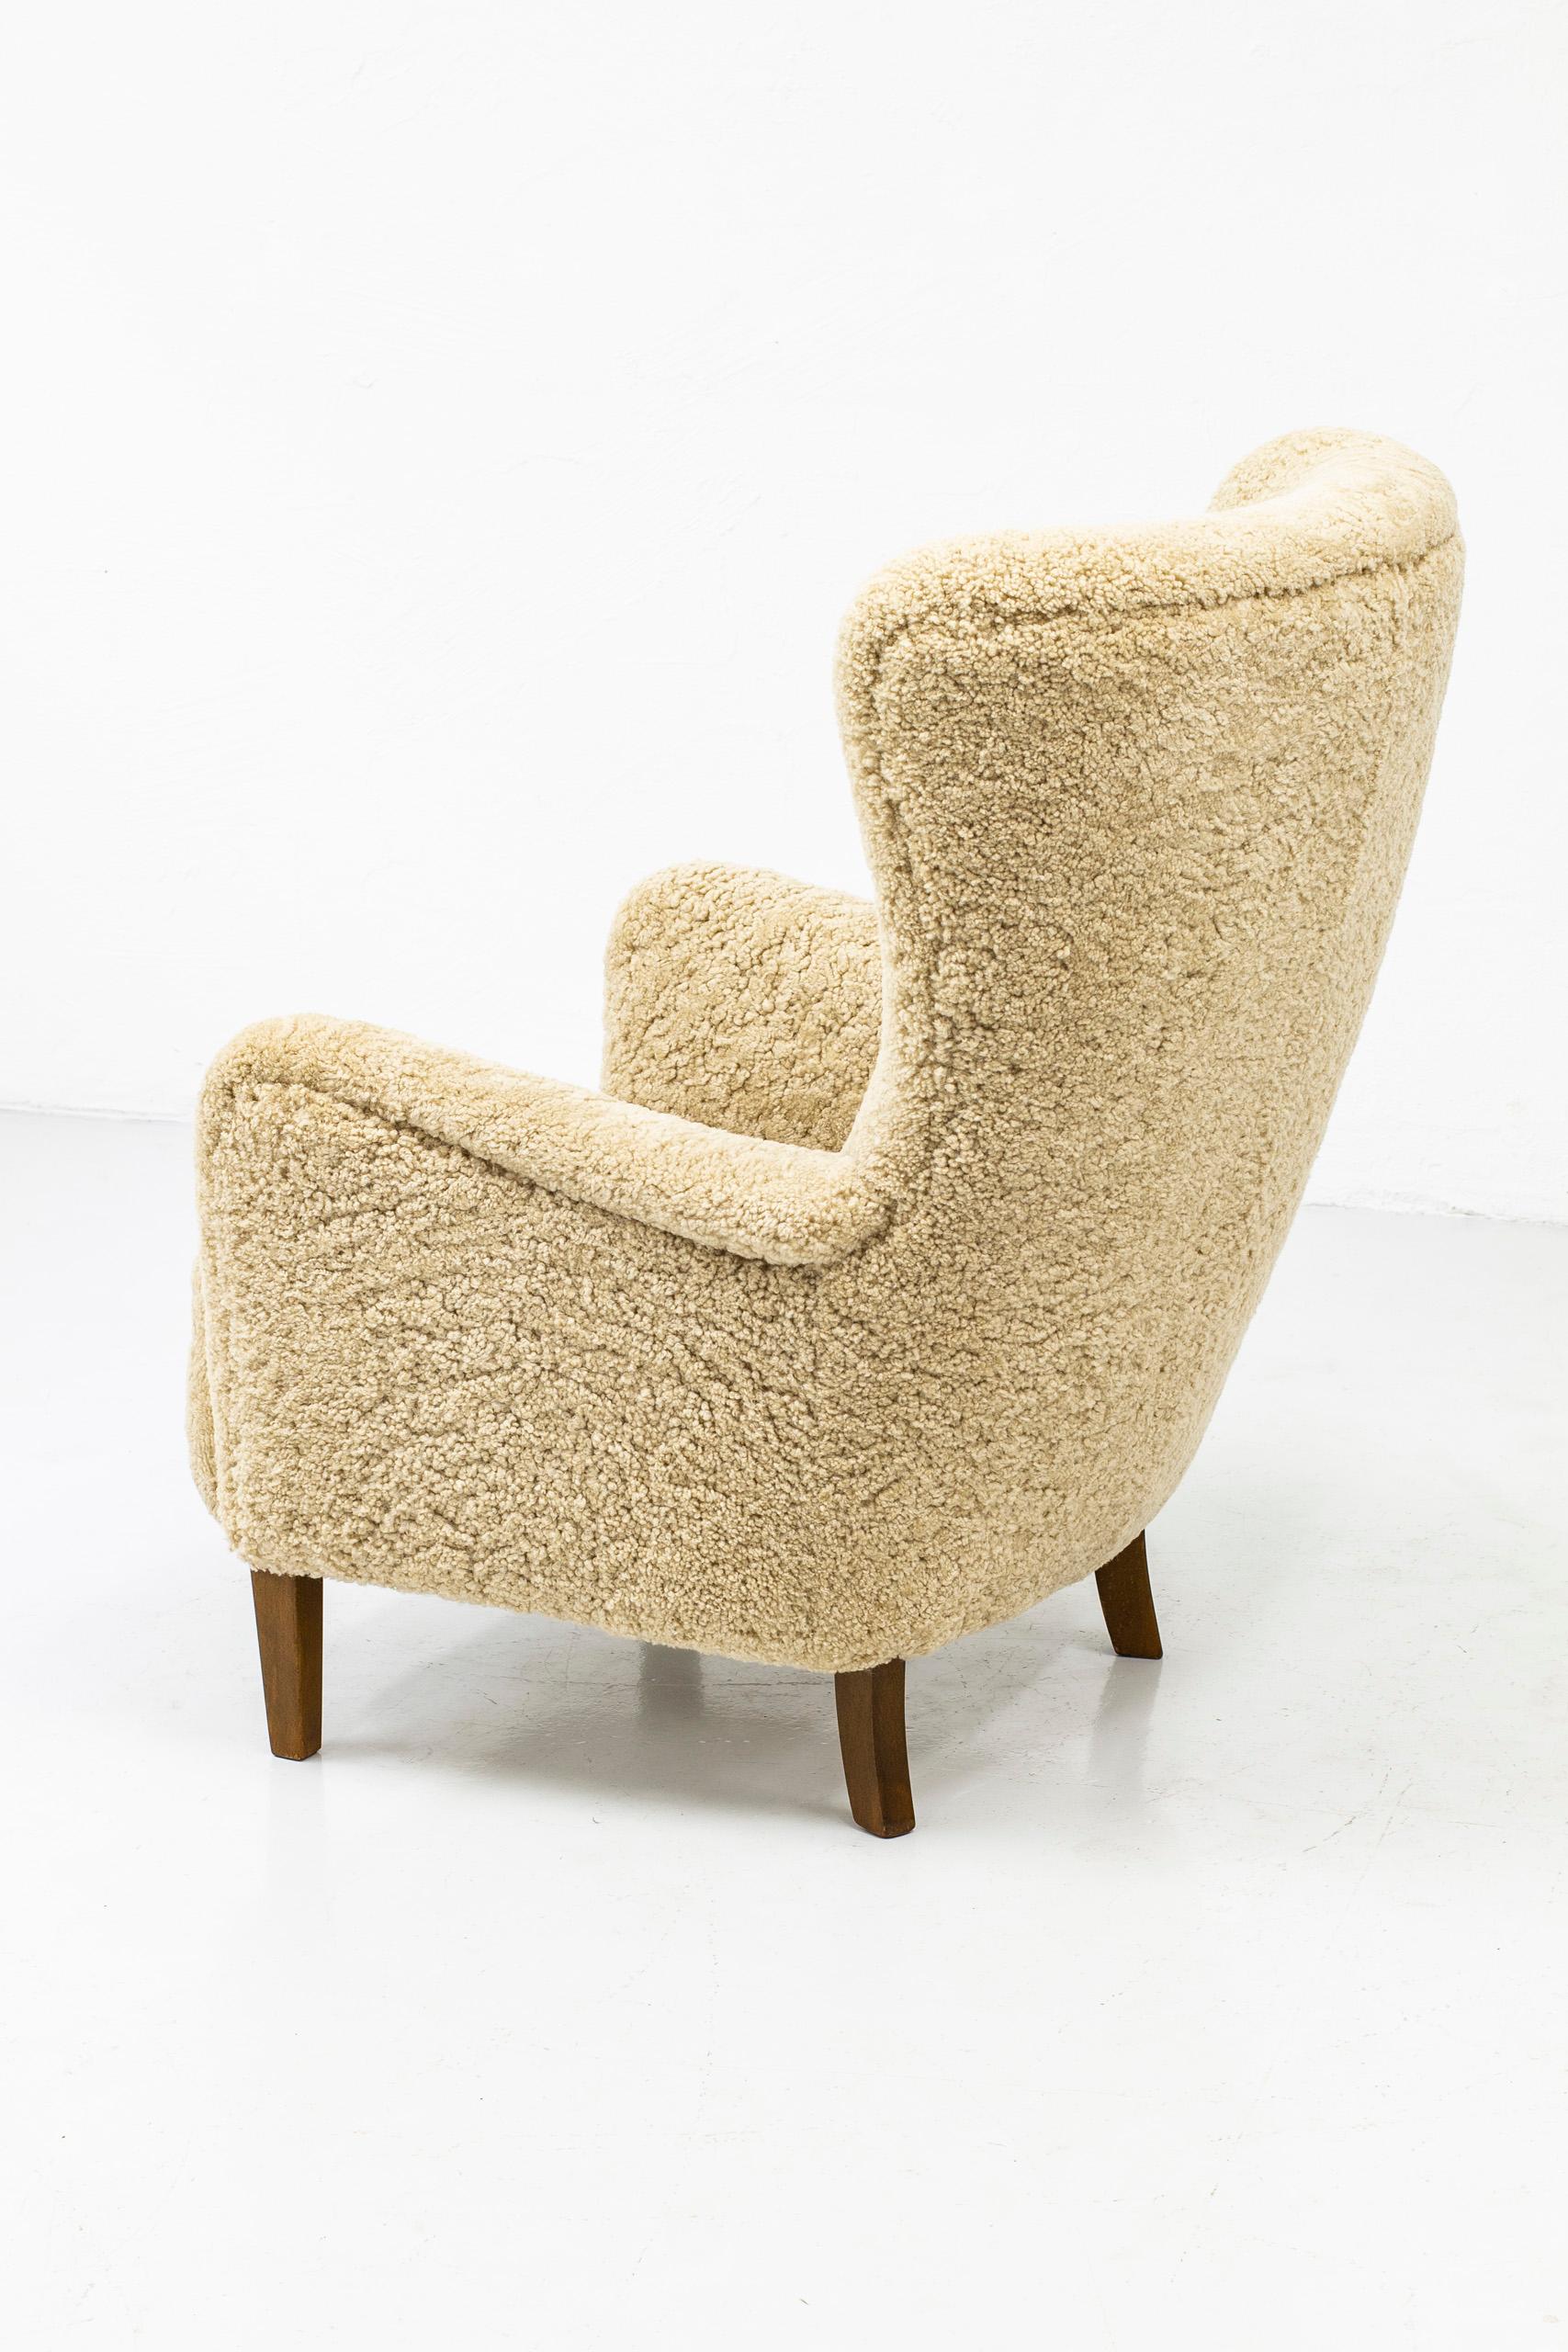 Danish Wing Back Chair with Sheep Skin in the Manner of Frits Henningsen 1